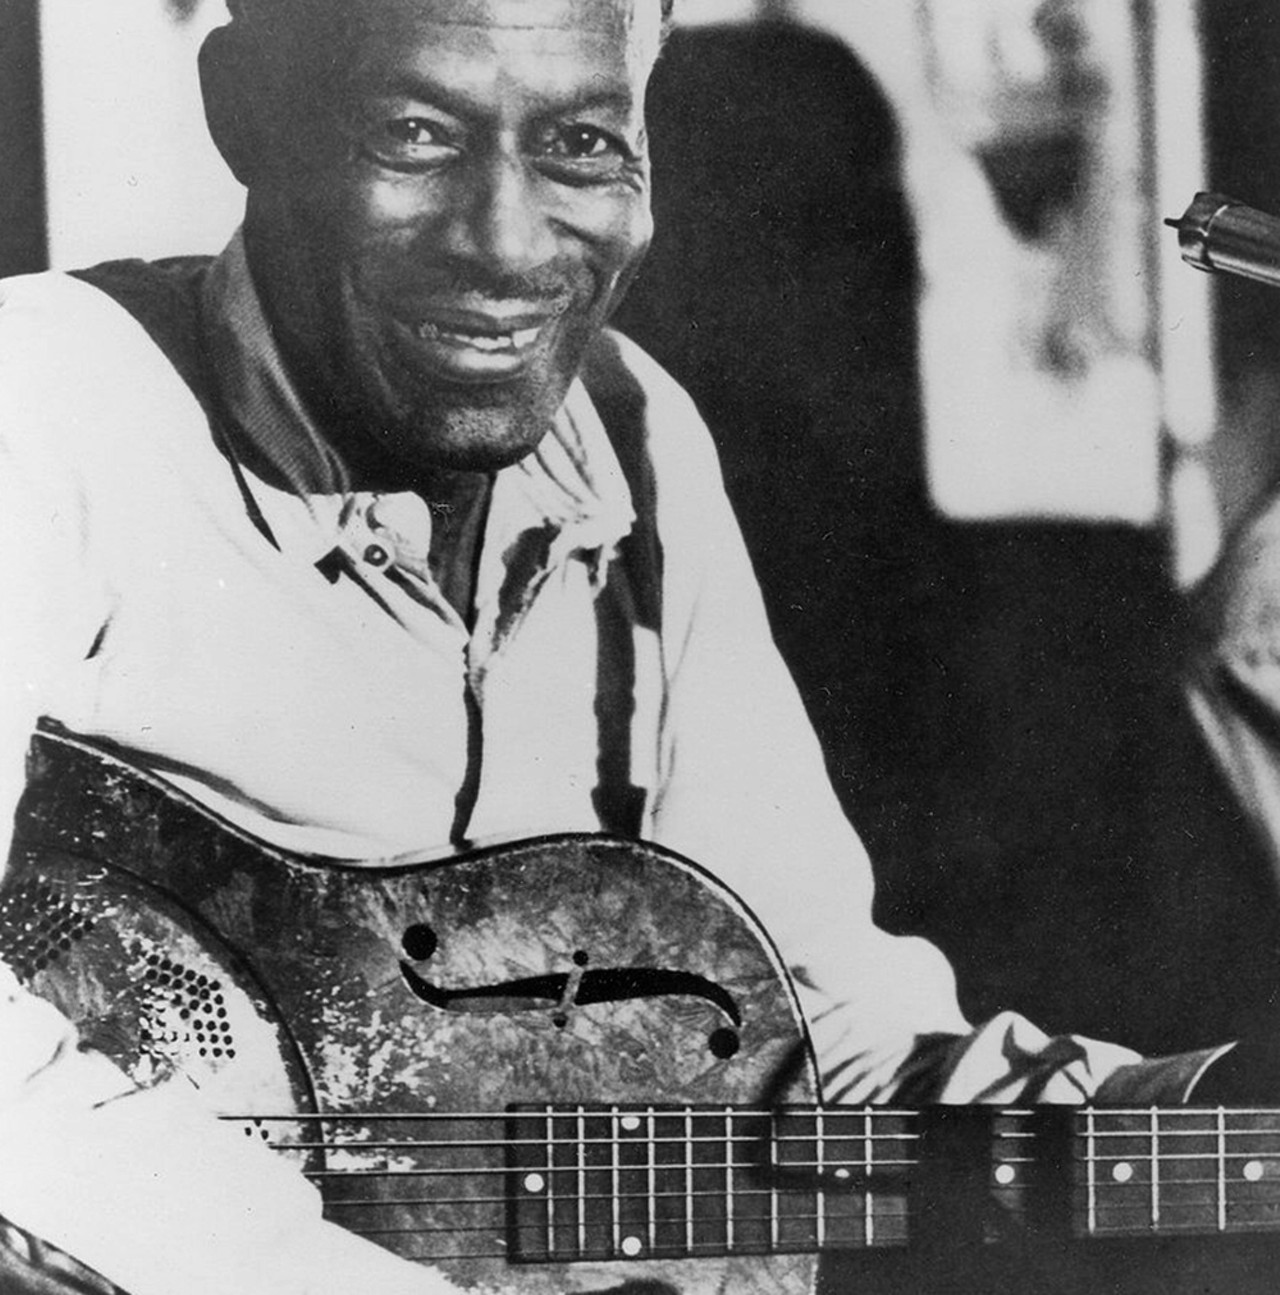 Son House
A former preacher from Mississippi, at the age of 25 Edward James "Son" House Jr. converted to the blues, where his slide guitar playing caught the attention of Charley Patton. While House's recordings originally sold poorly, his career had a second wind thanks to the blues revival of the 1960s. He retired in 1974, and later moved to Detroit, where he died in 1988 at age 86. He is buried at the Mt. Hazel Cemetery, where members of the Detroit Blues Society raised money through benefit concerts to build a monument.
Photo Public domain, Wikimedia Commons